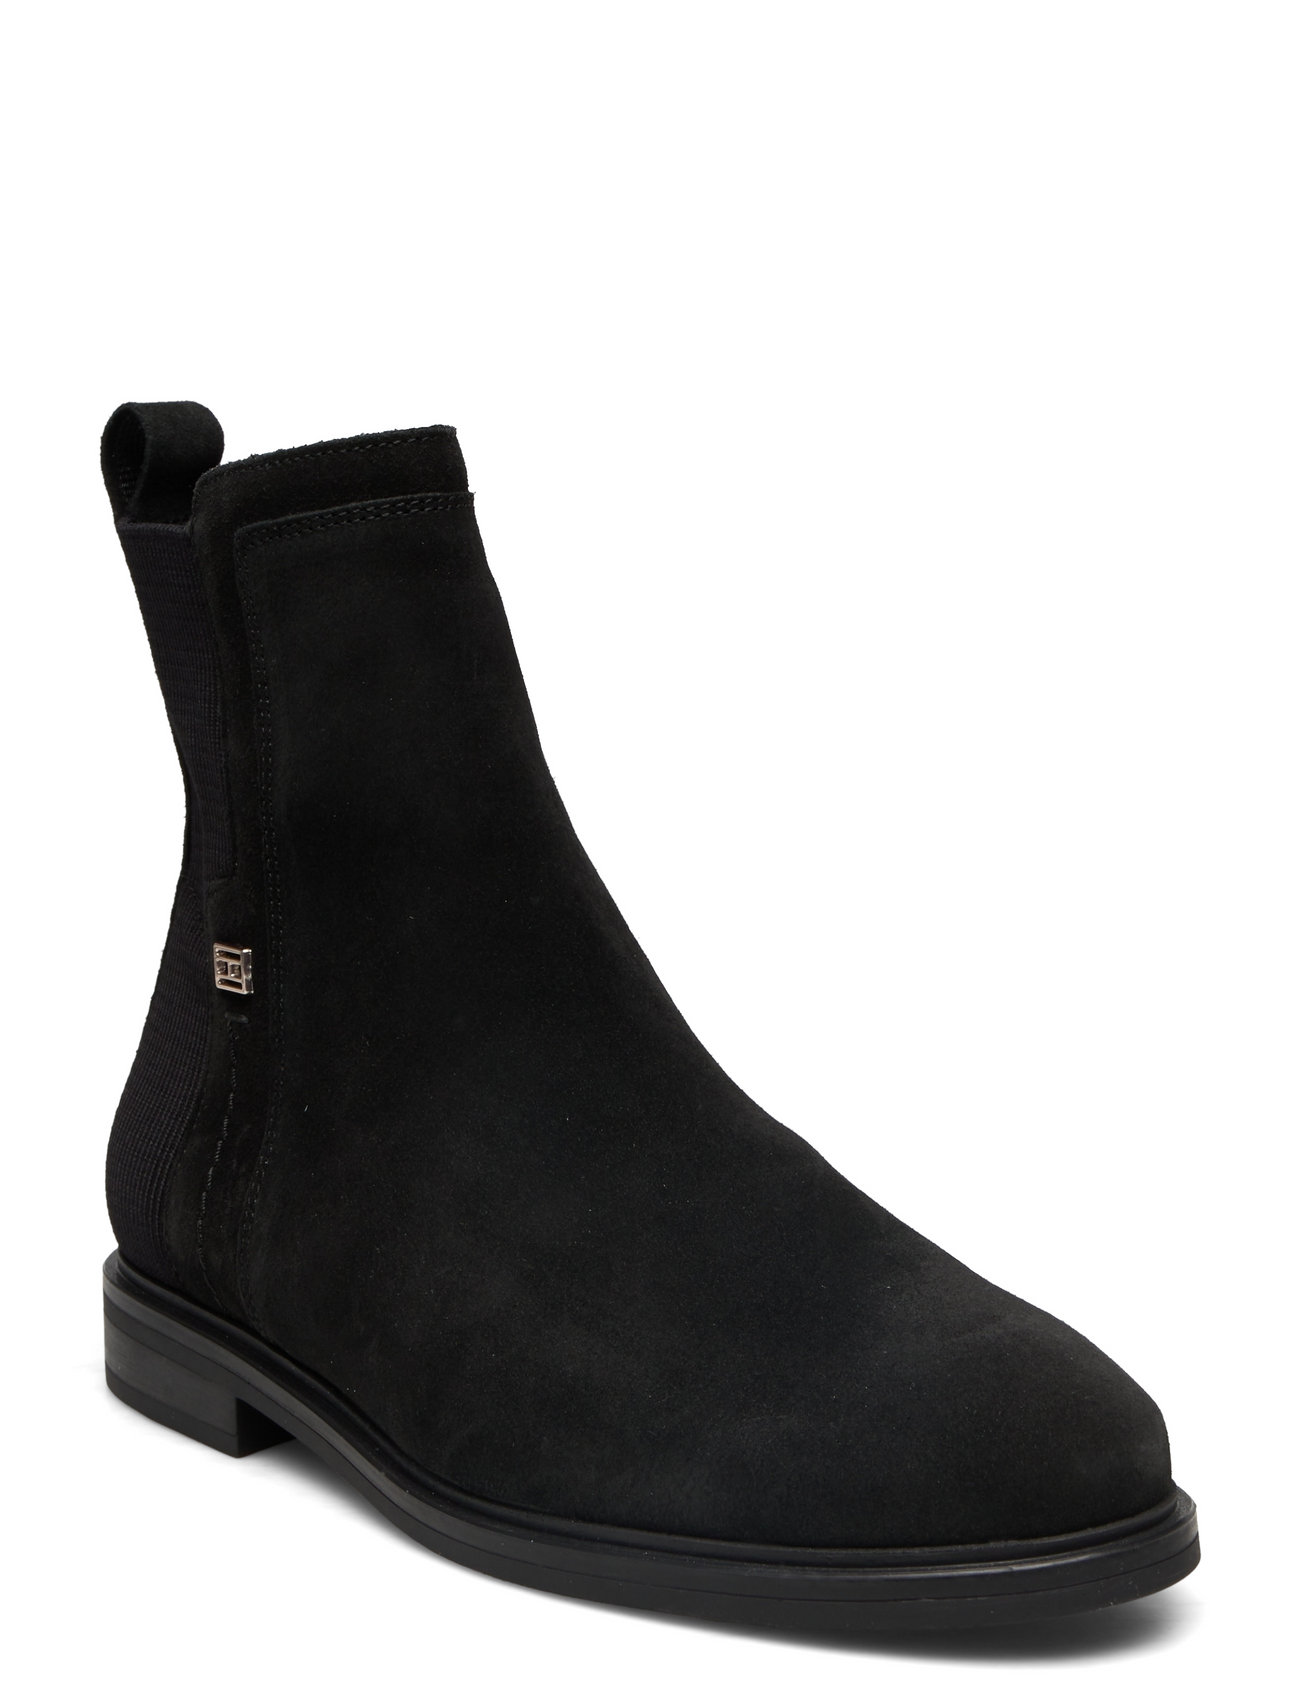 Tommy Essentials Boot Shoes Boots Ankle Boots Ankle Boots Flat Heel Black Tommy Hilfiger